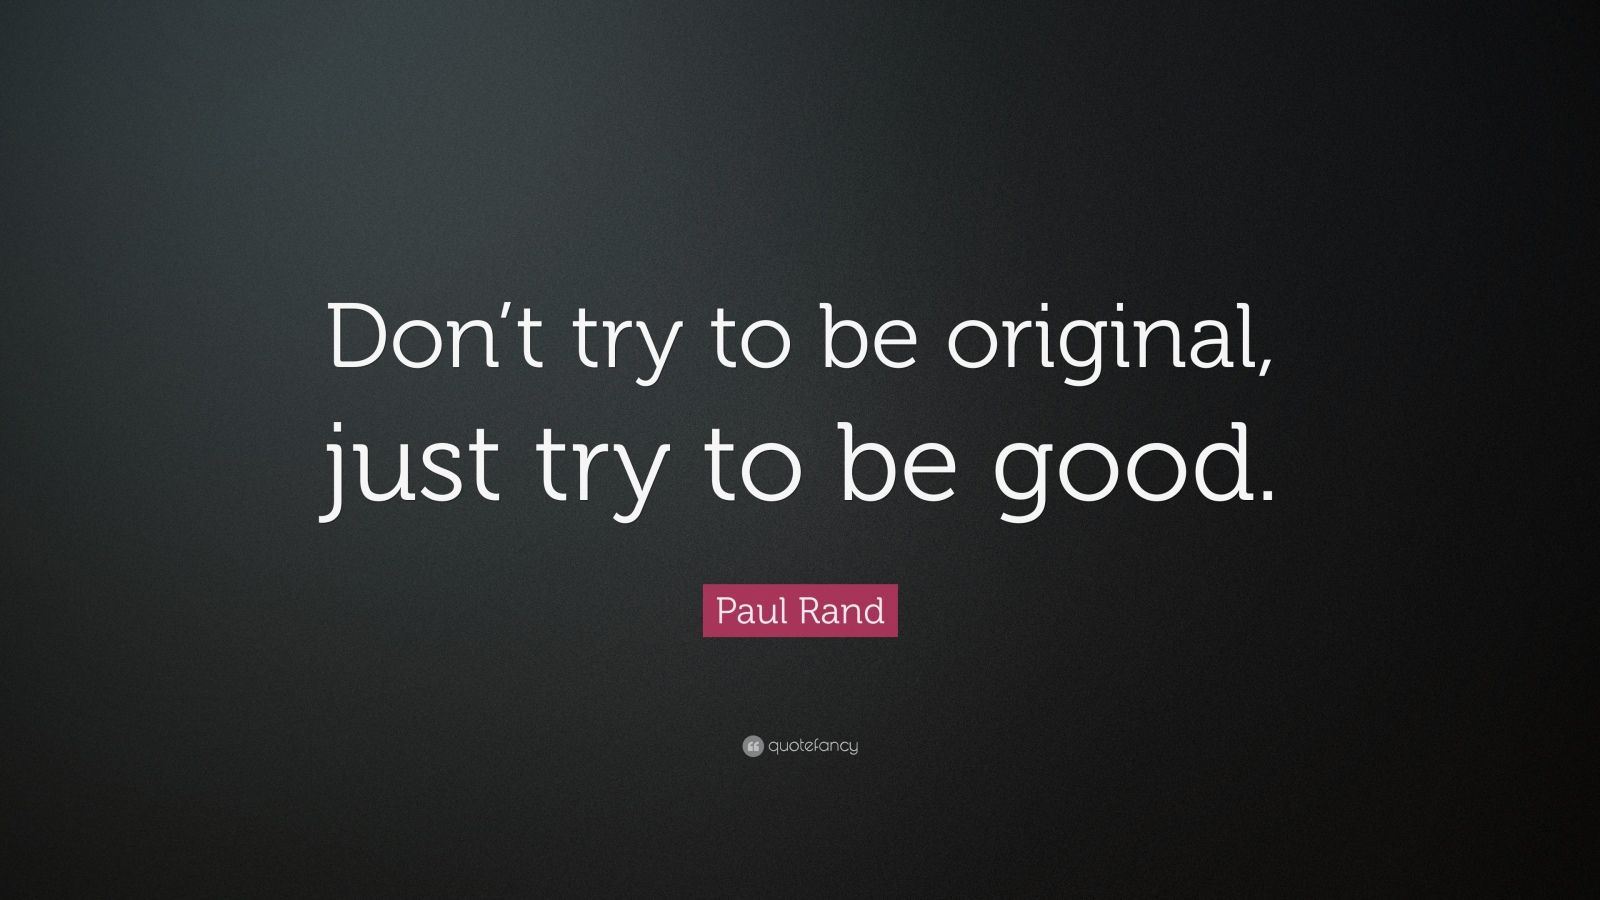 20677-Paul-Rand-Quote-Don-t-try-to-be-original-just-try-to-be-good.jpg